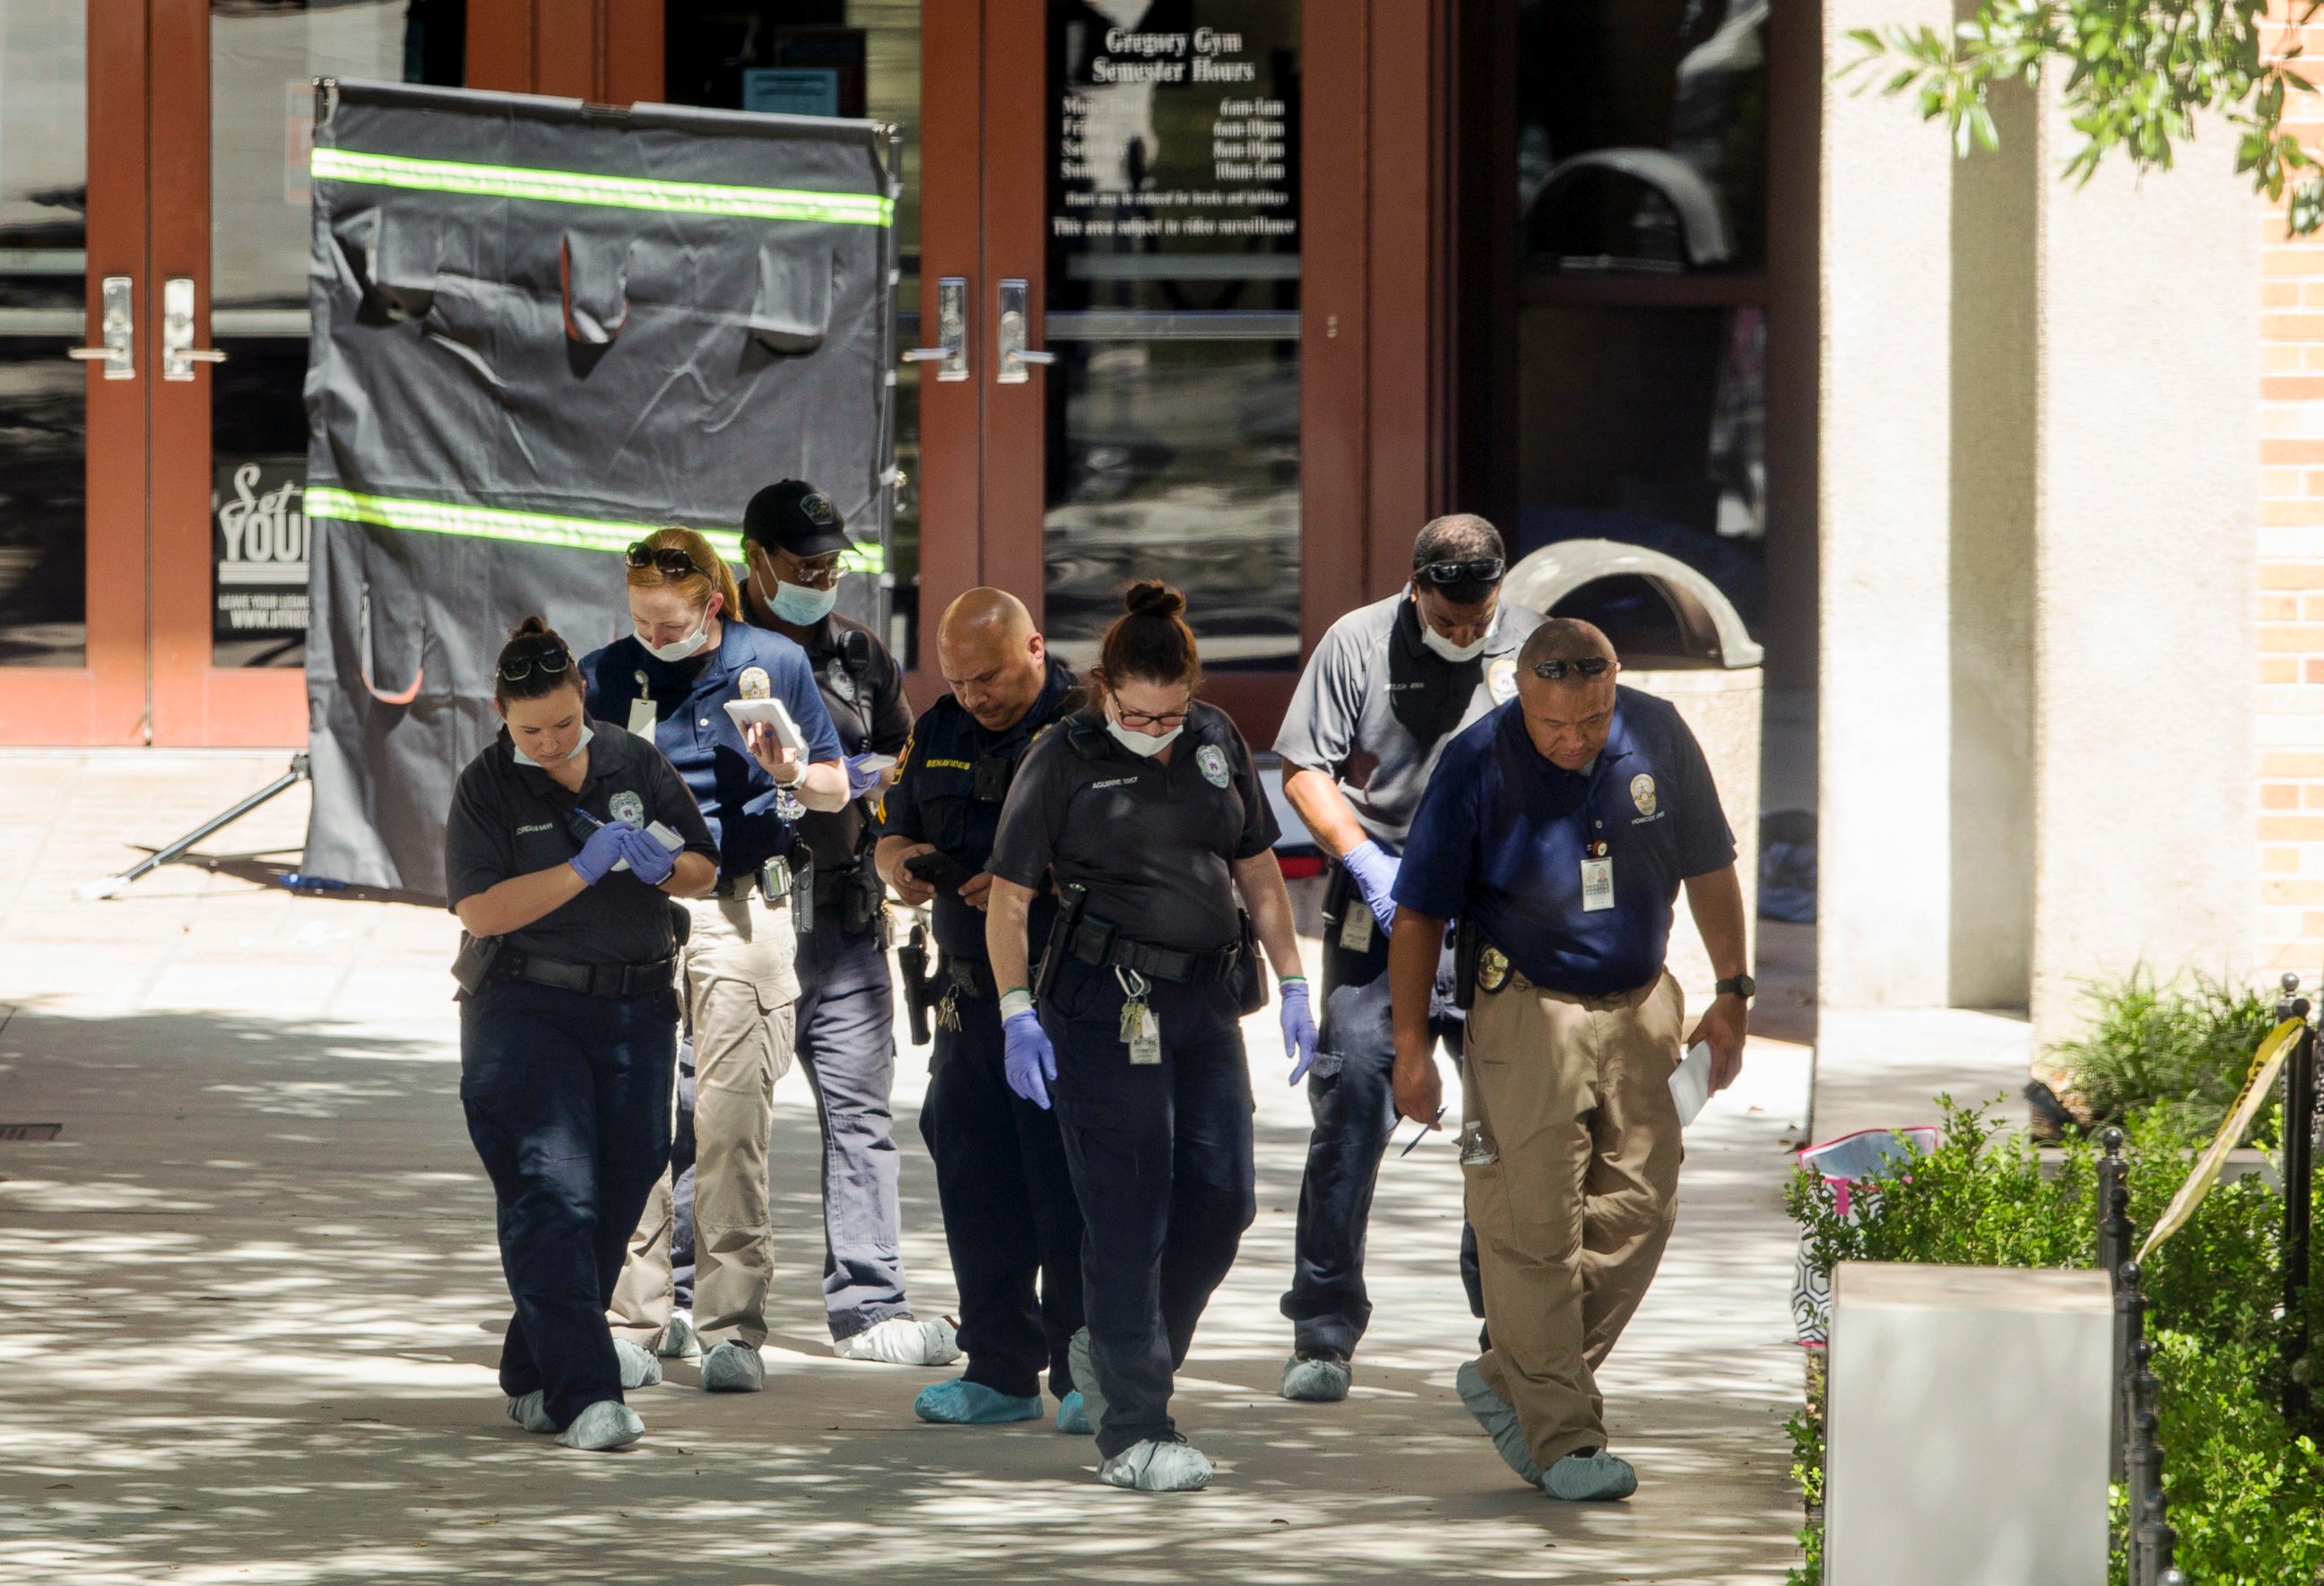 PHOTO: Officials investigate after a fatal stabbing attack at the University of Texas campus, May 1, 2017, in Austin, Texas.